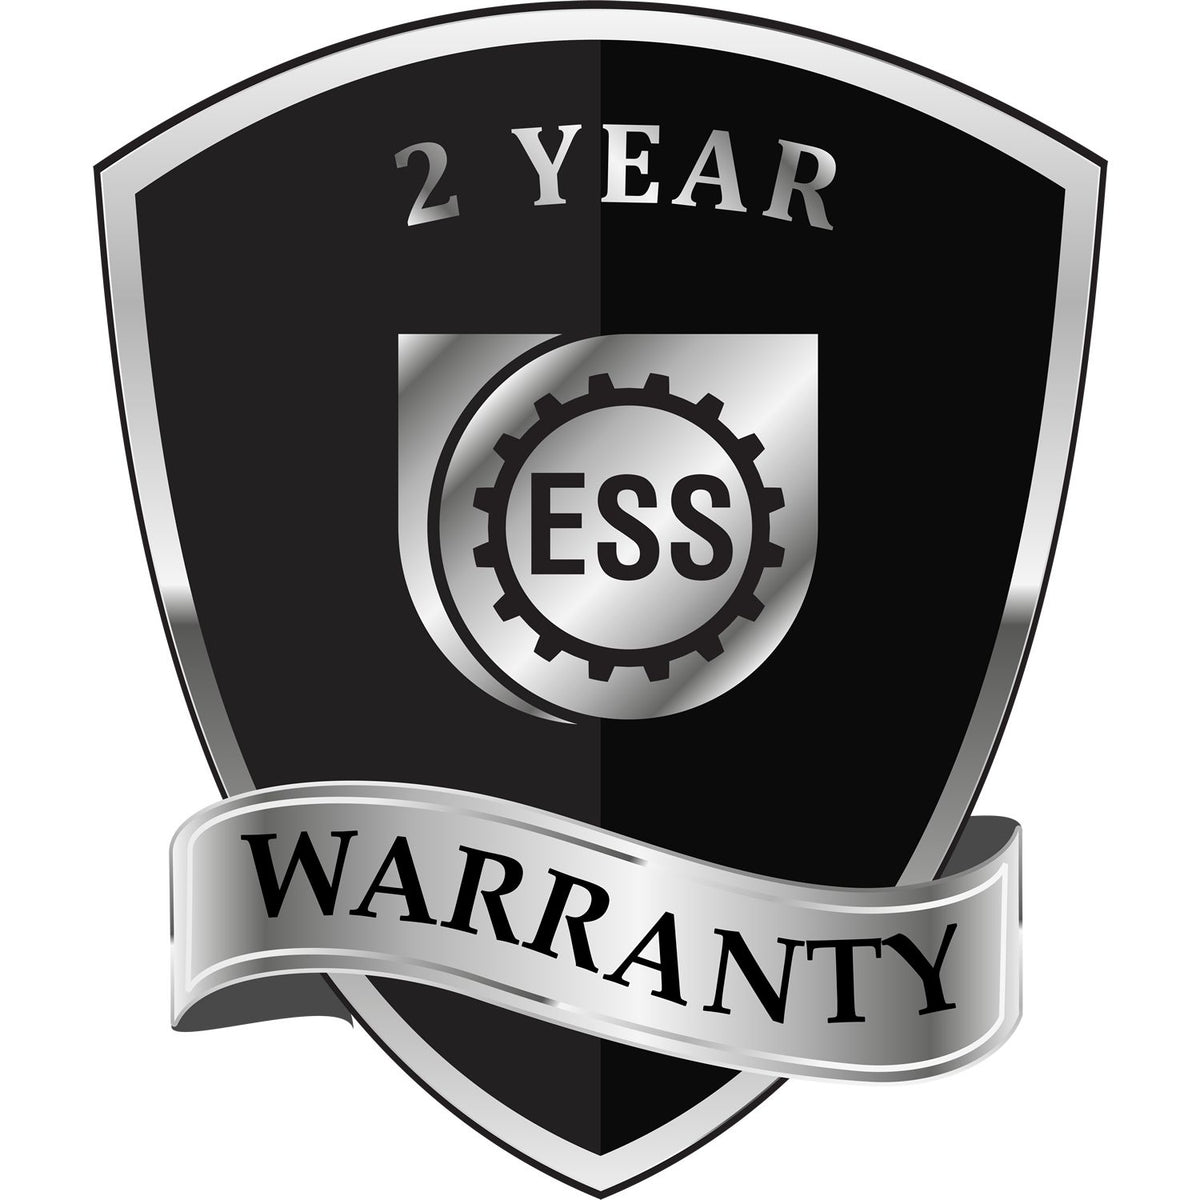 A black and silver badge or emblem showing warranty information for the Soft Missouri Professional Geologist Seal